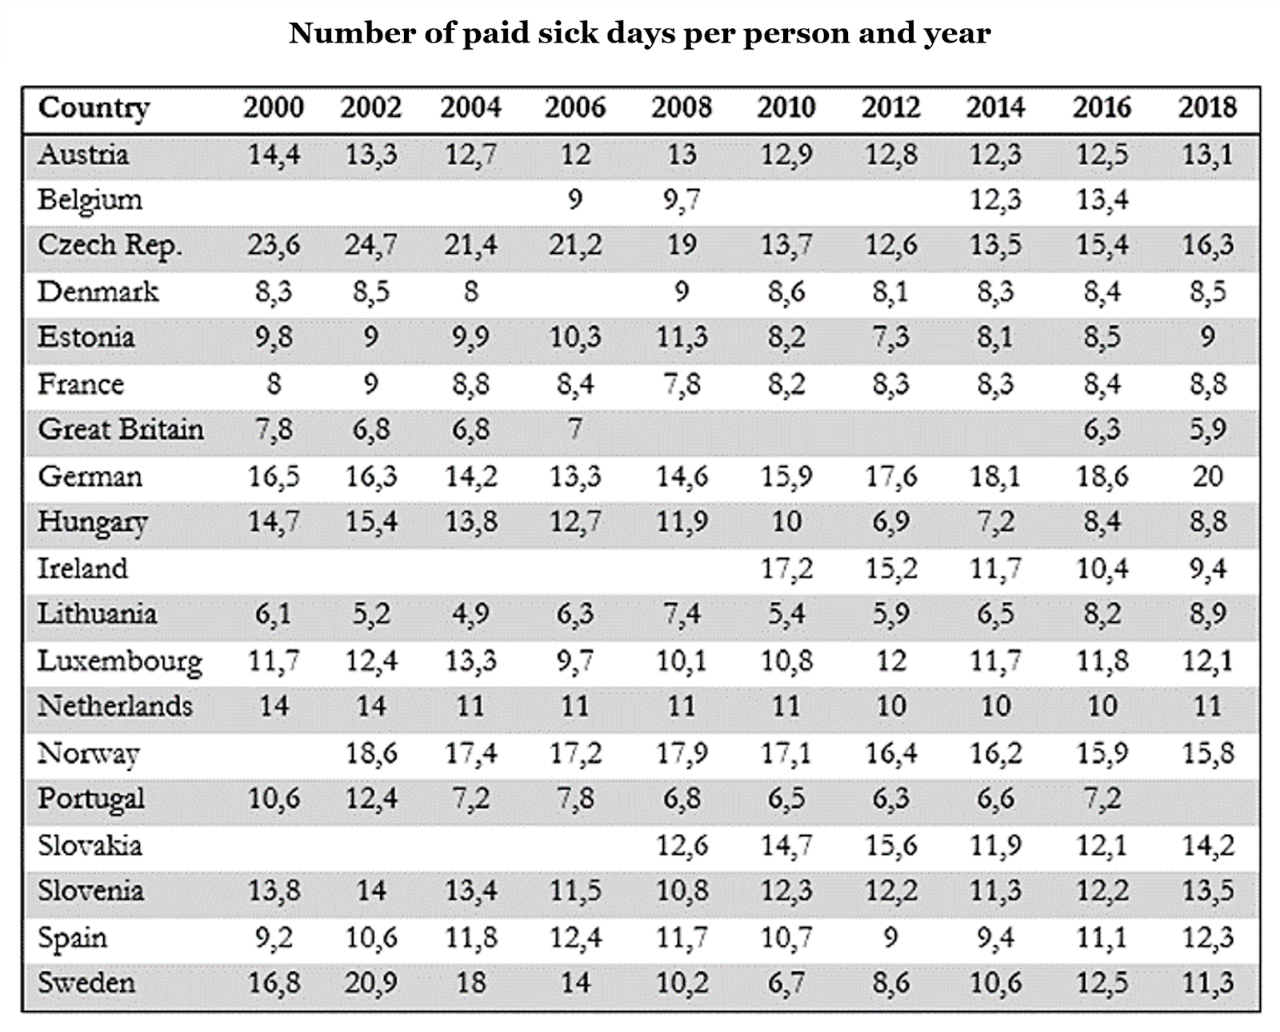 A table showing the number of paid sick days per person and year from 2000-2018 from many European countries.